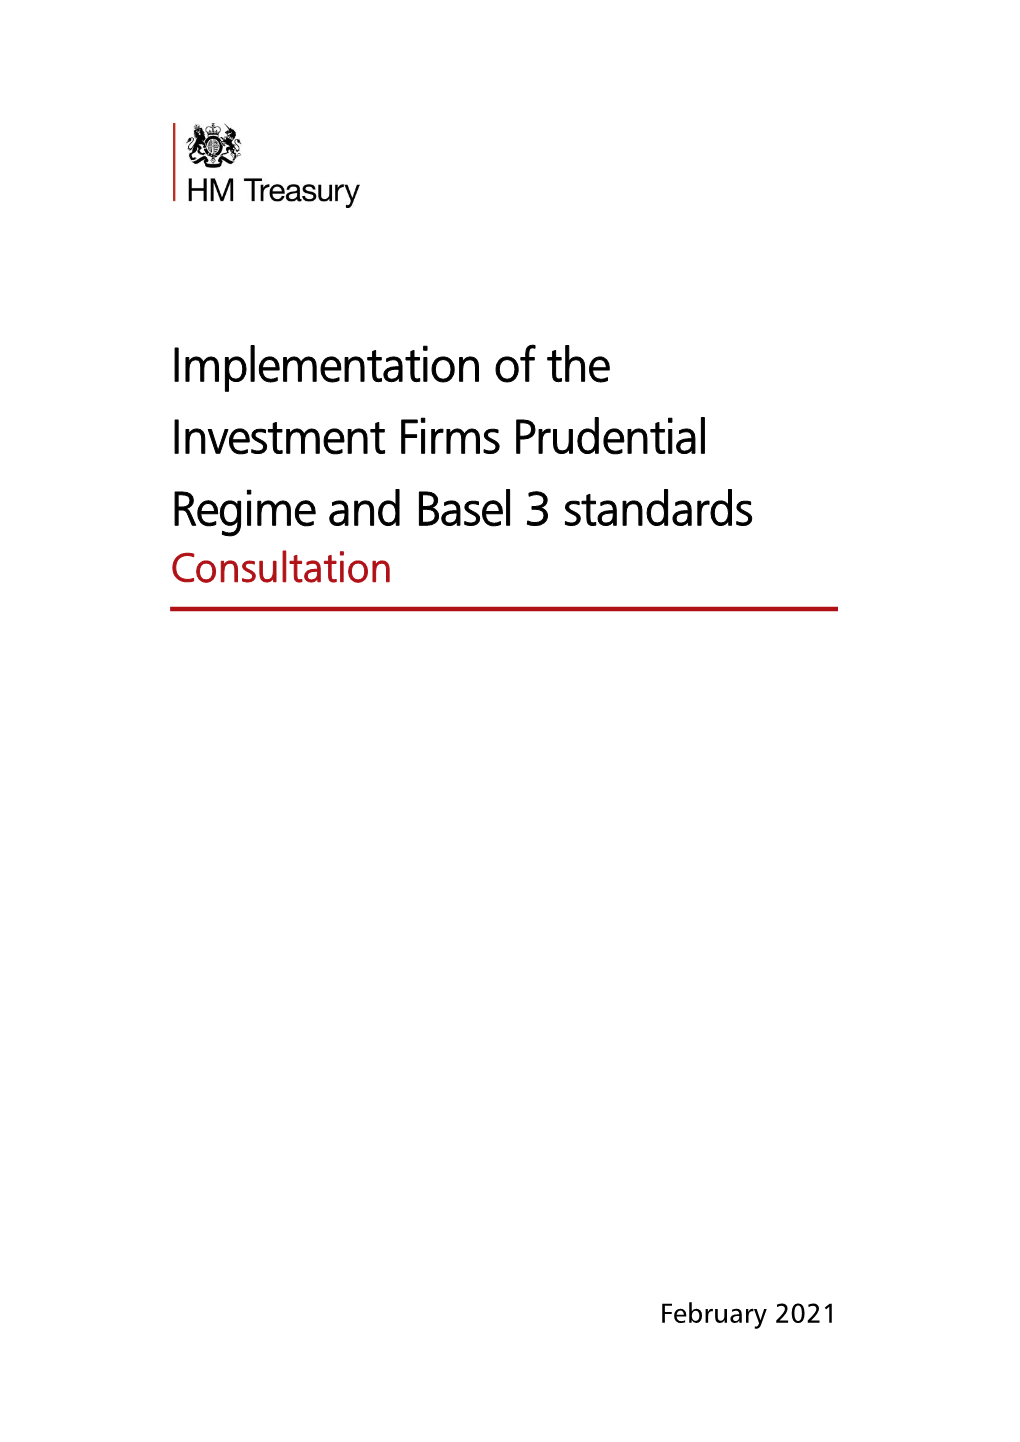 Implementation of the Investment Firms Prudential Regime and Basel 3 Standards Consultation